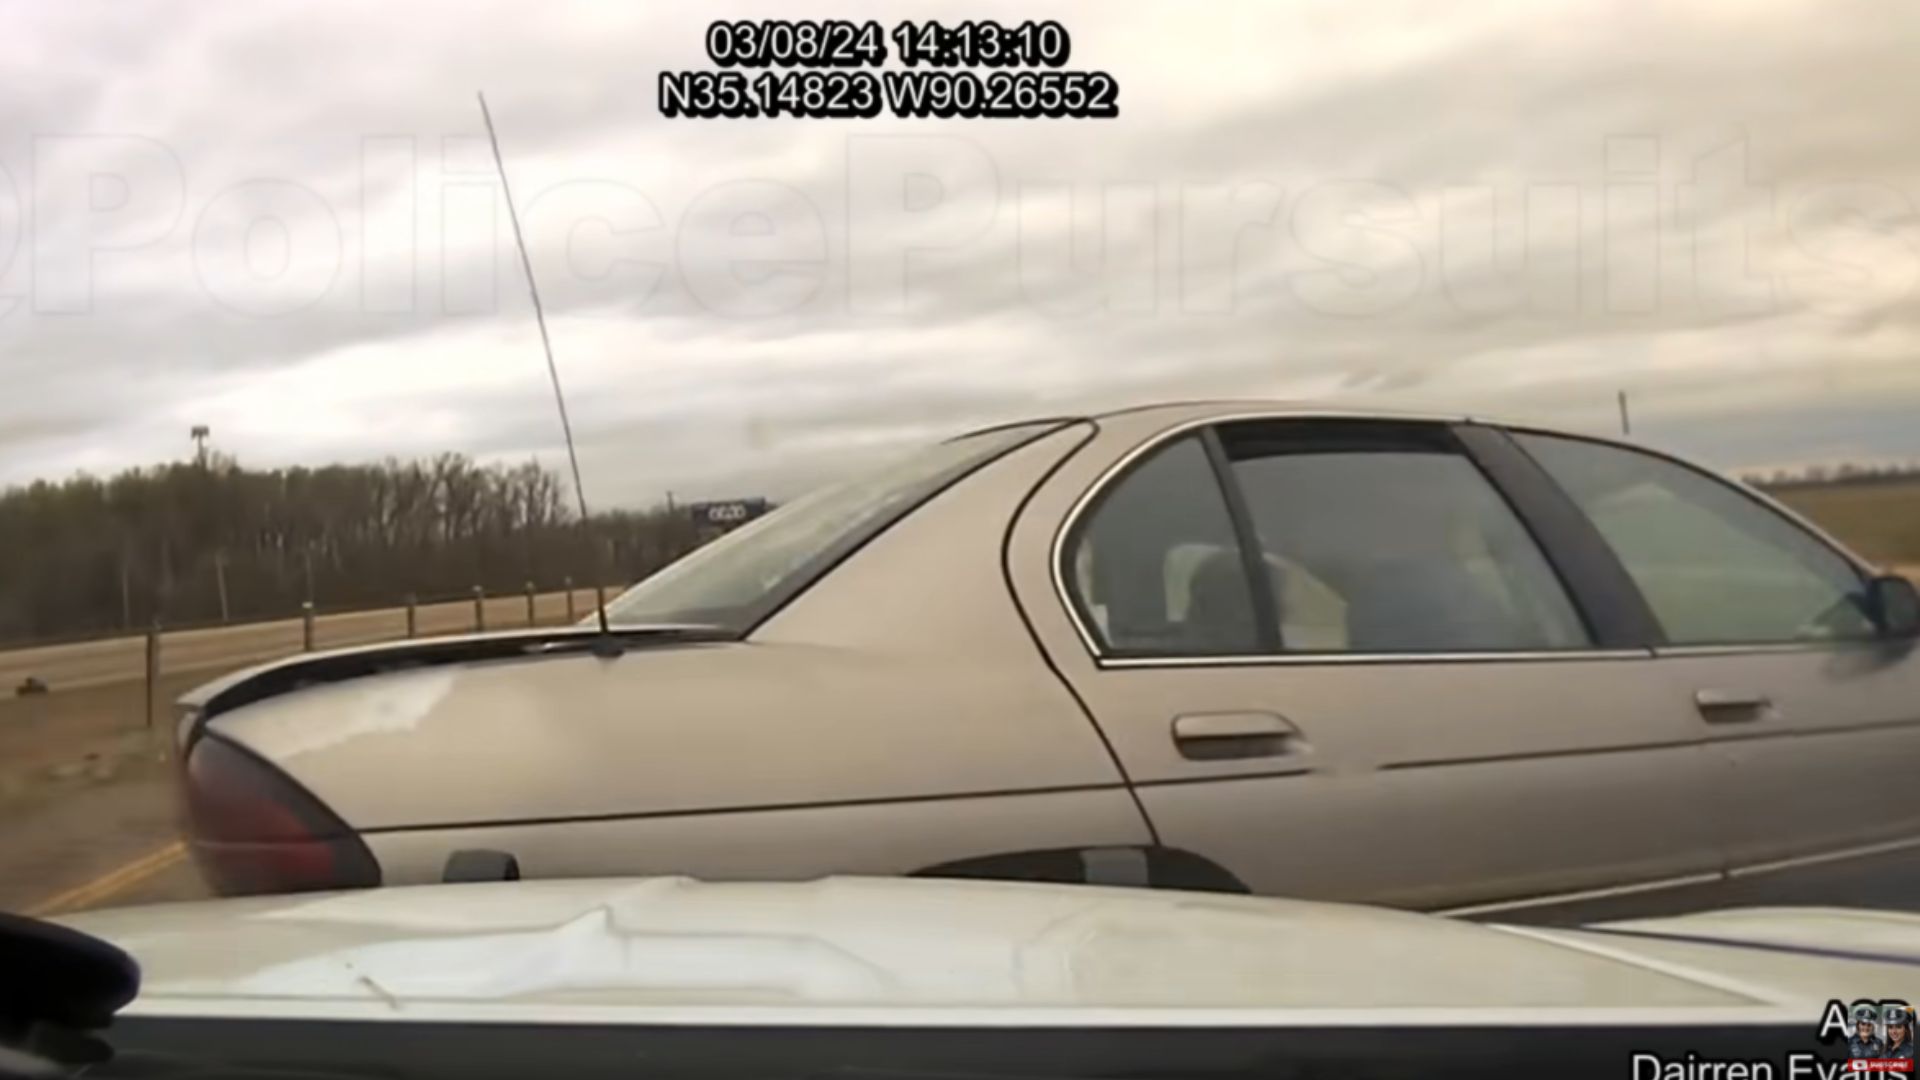 Watch An Arkansas Trooper Quickly PIT A Suspect At 113 MPH